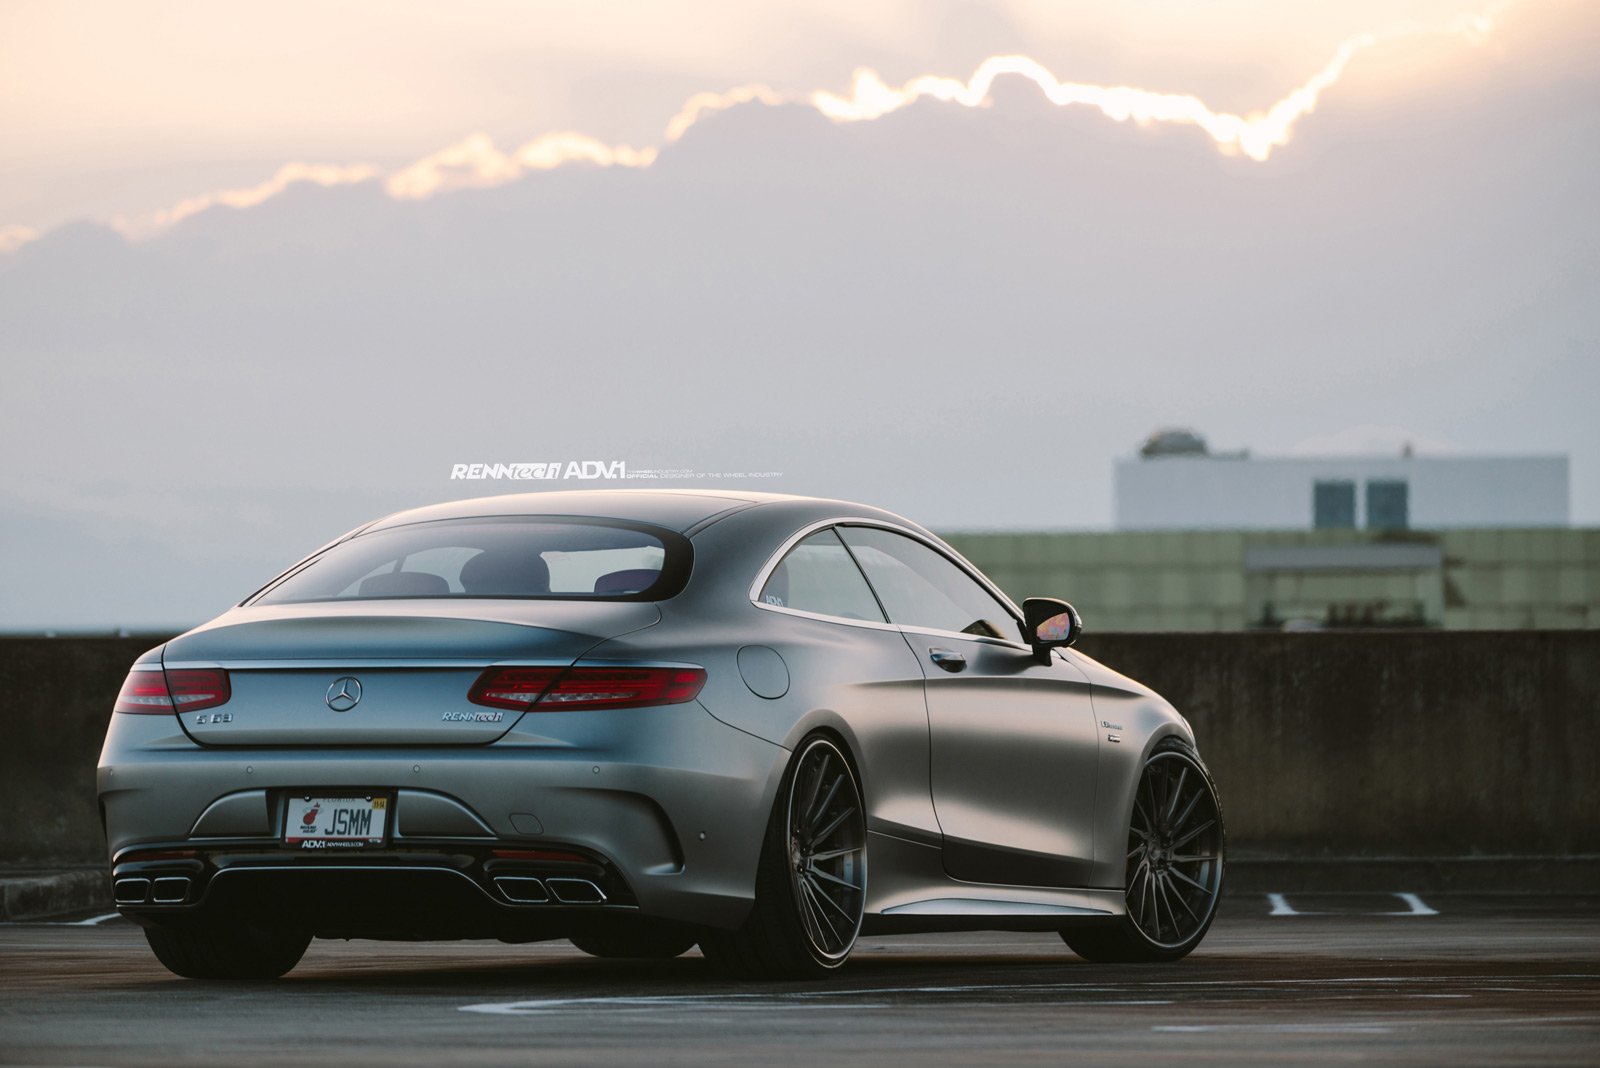 2015, Adv1, Wheels, Tuning, Cars, Mercedes, S63, Amg, Coupe Wallpaper